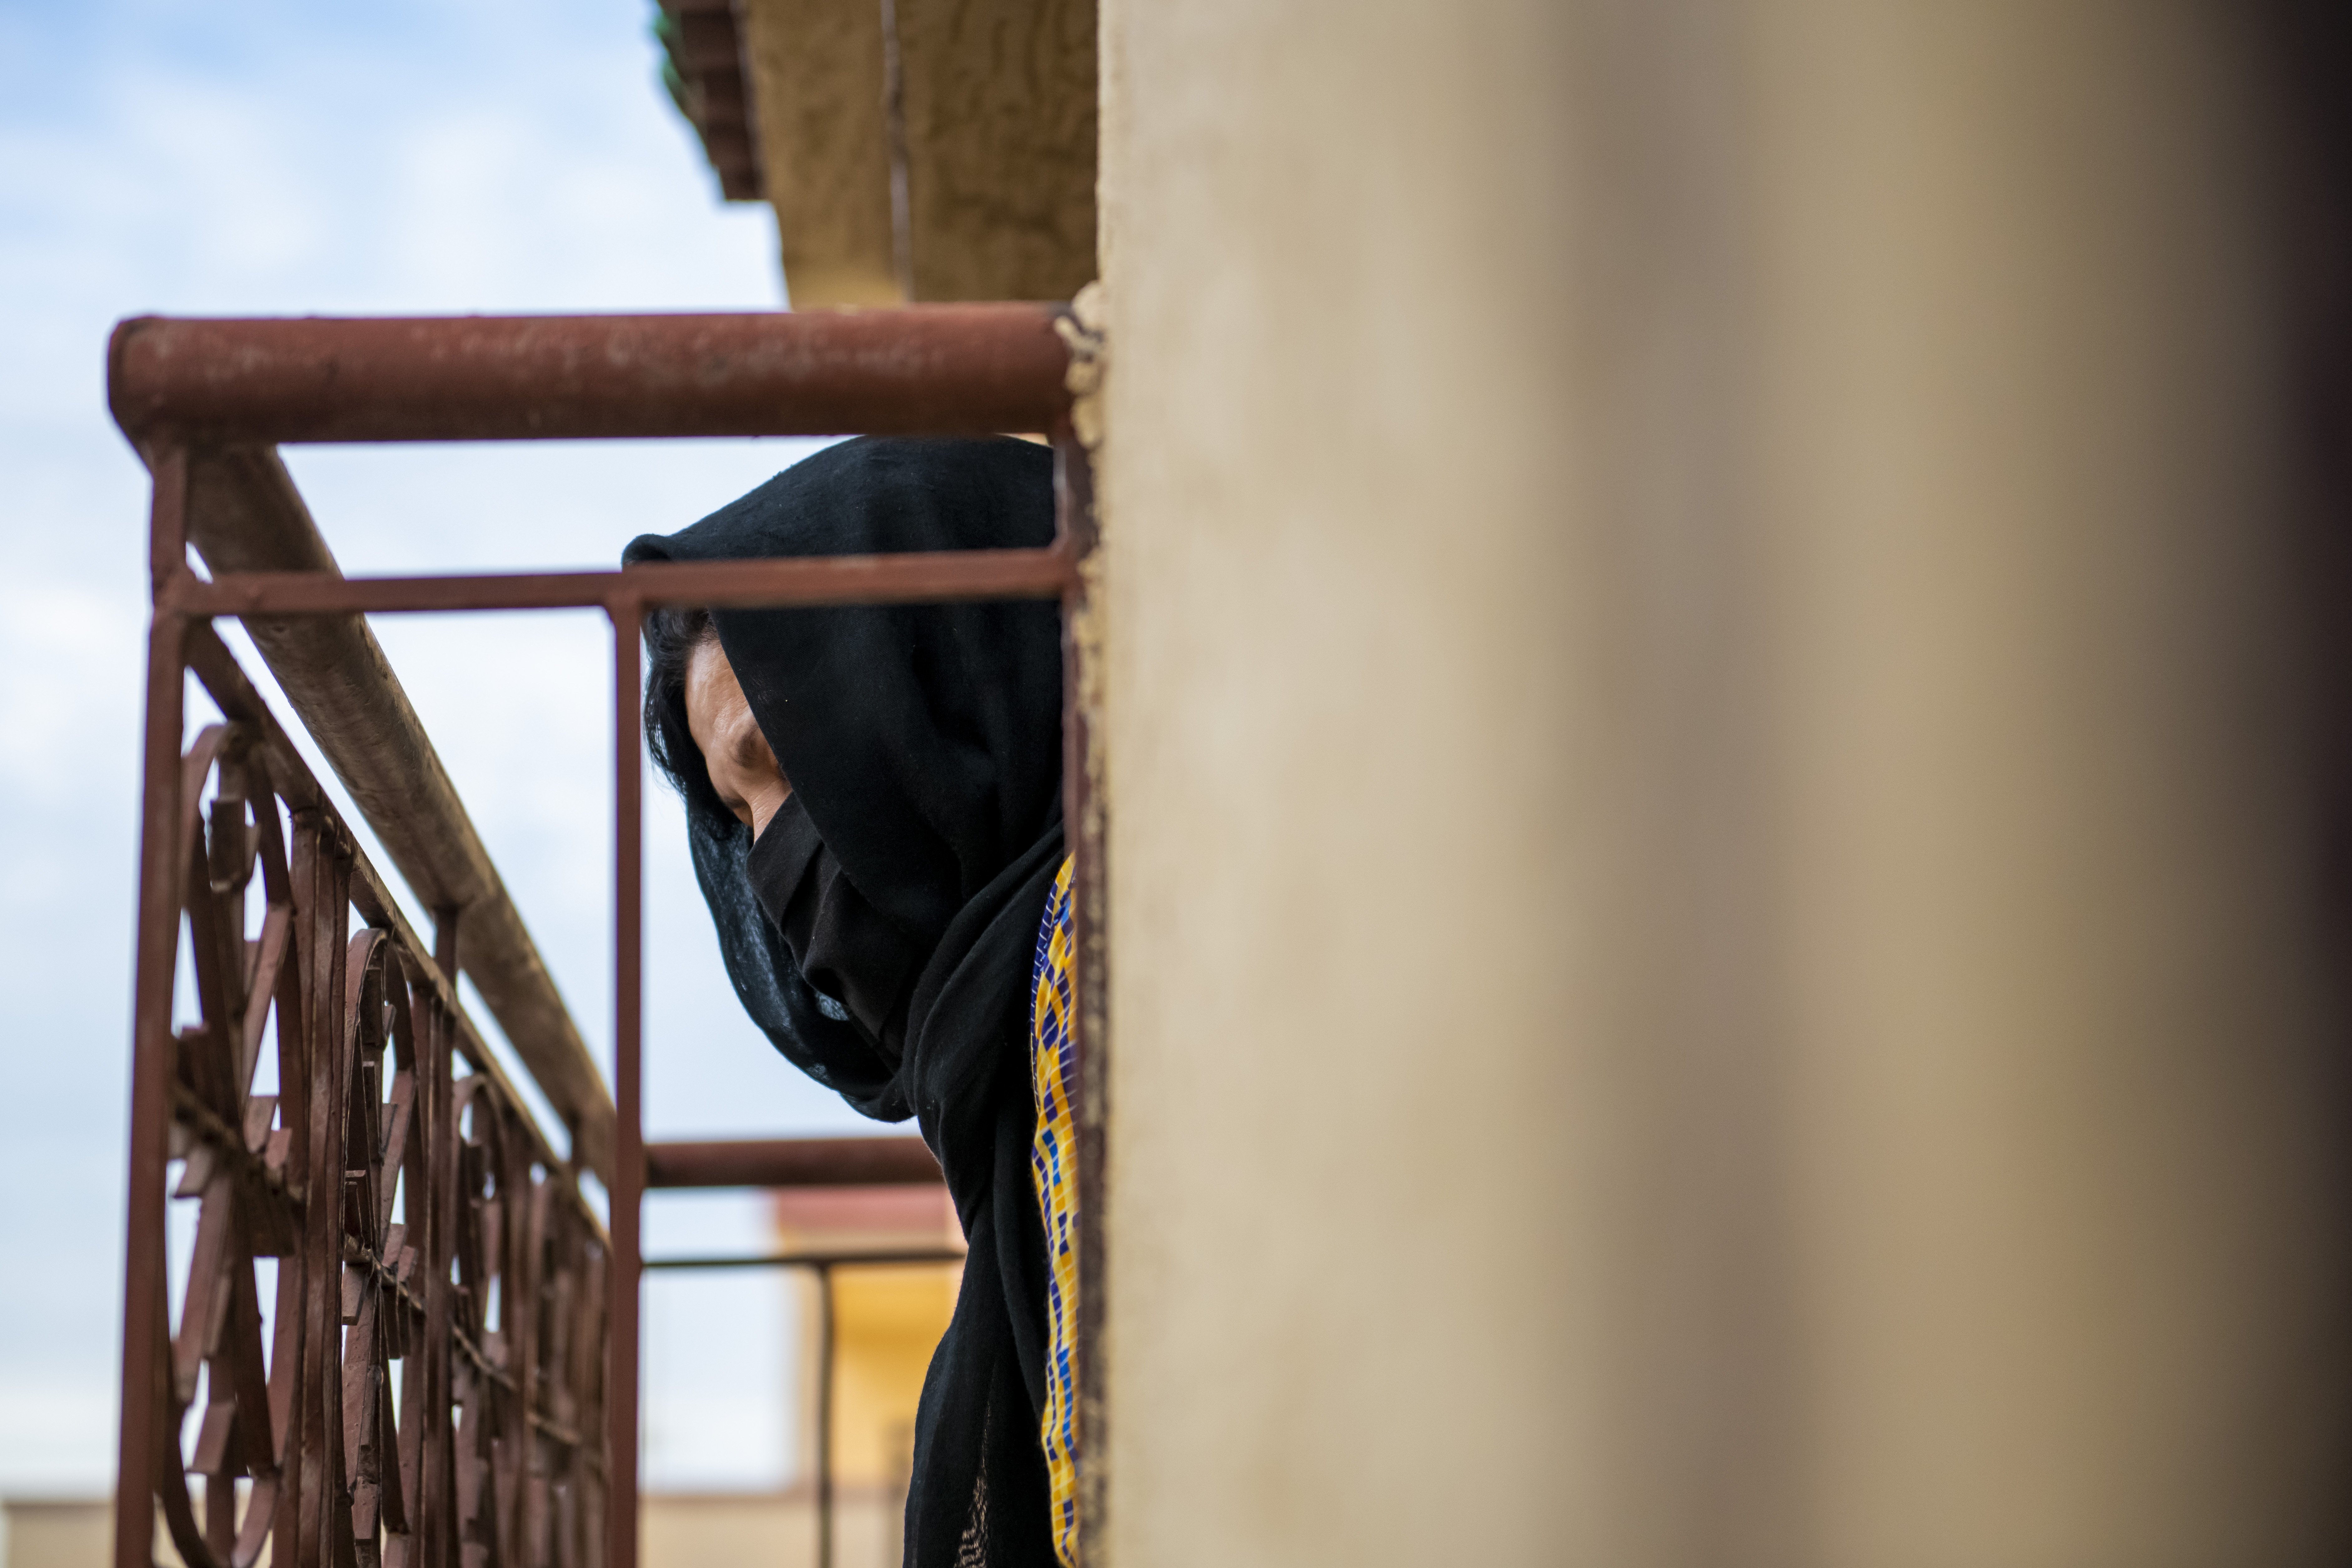 In Morocco, many survivors do not report violence due to fear and mistrust of the police. Photo: UN Women/Mohammed Bakir